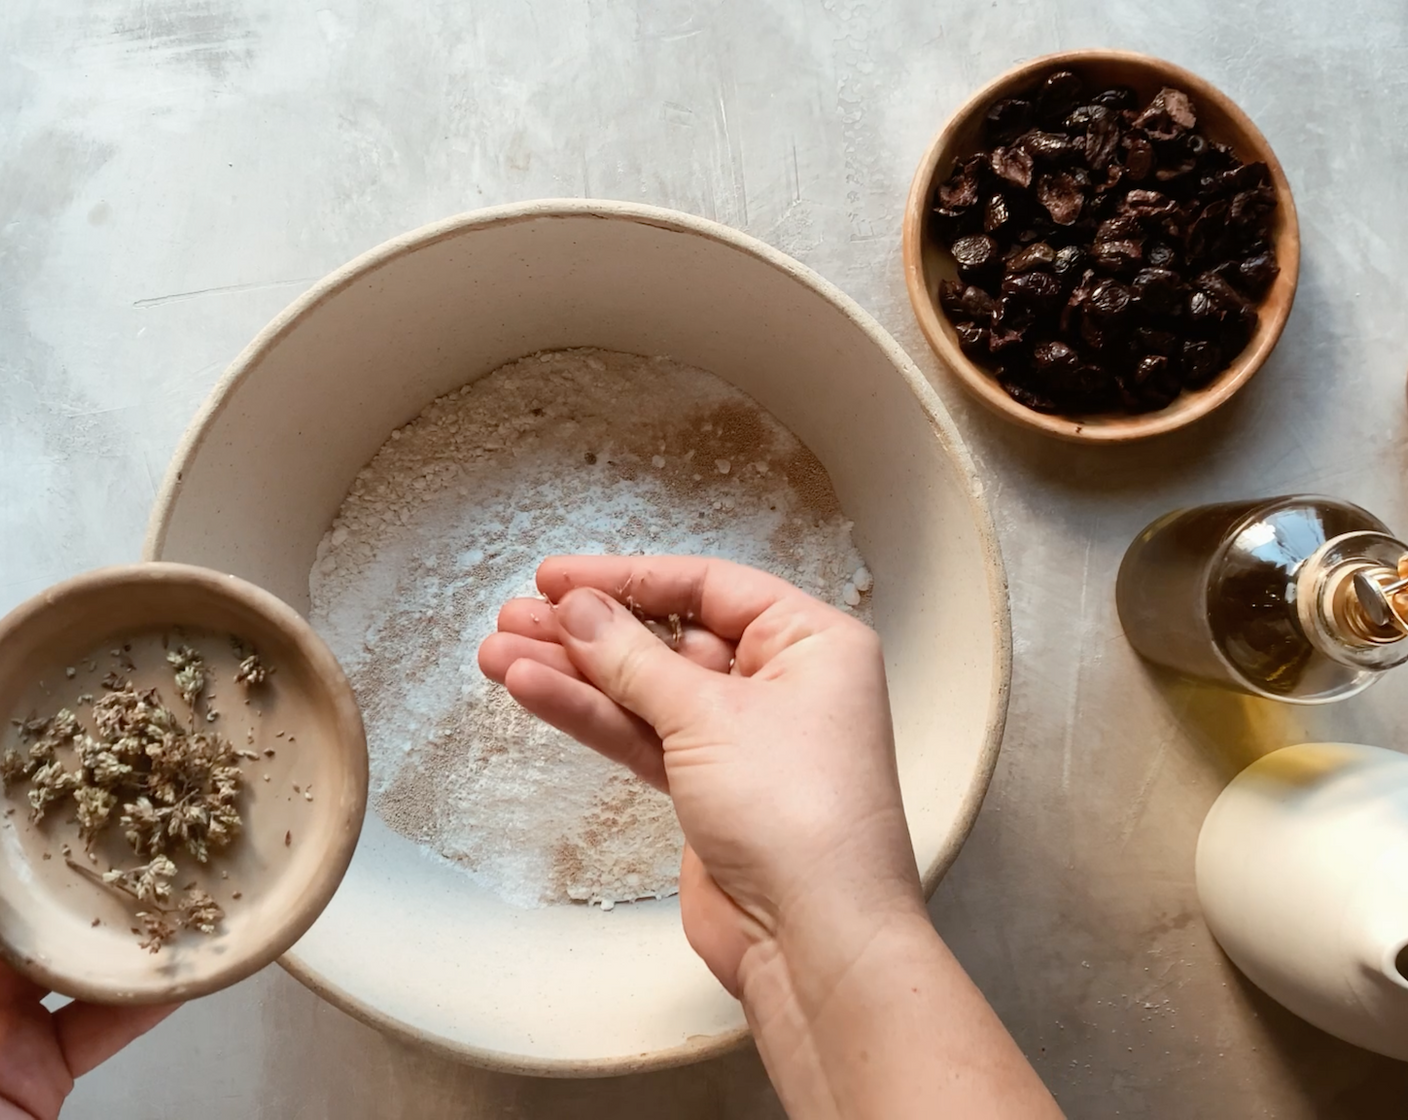 step 1 In a large mixing bowl, combine the Unbleached All Purpose Flour (4 cups), Kosher Salt (1 tsp), Active Dry Yeast (3/4 tsp), Dried Greek Oregano (2 Tbsp), and Granulated Sugar (1/2 Tbsp). Mix the dry ingredients with a wooden spoon or spatula until well combined.